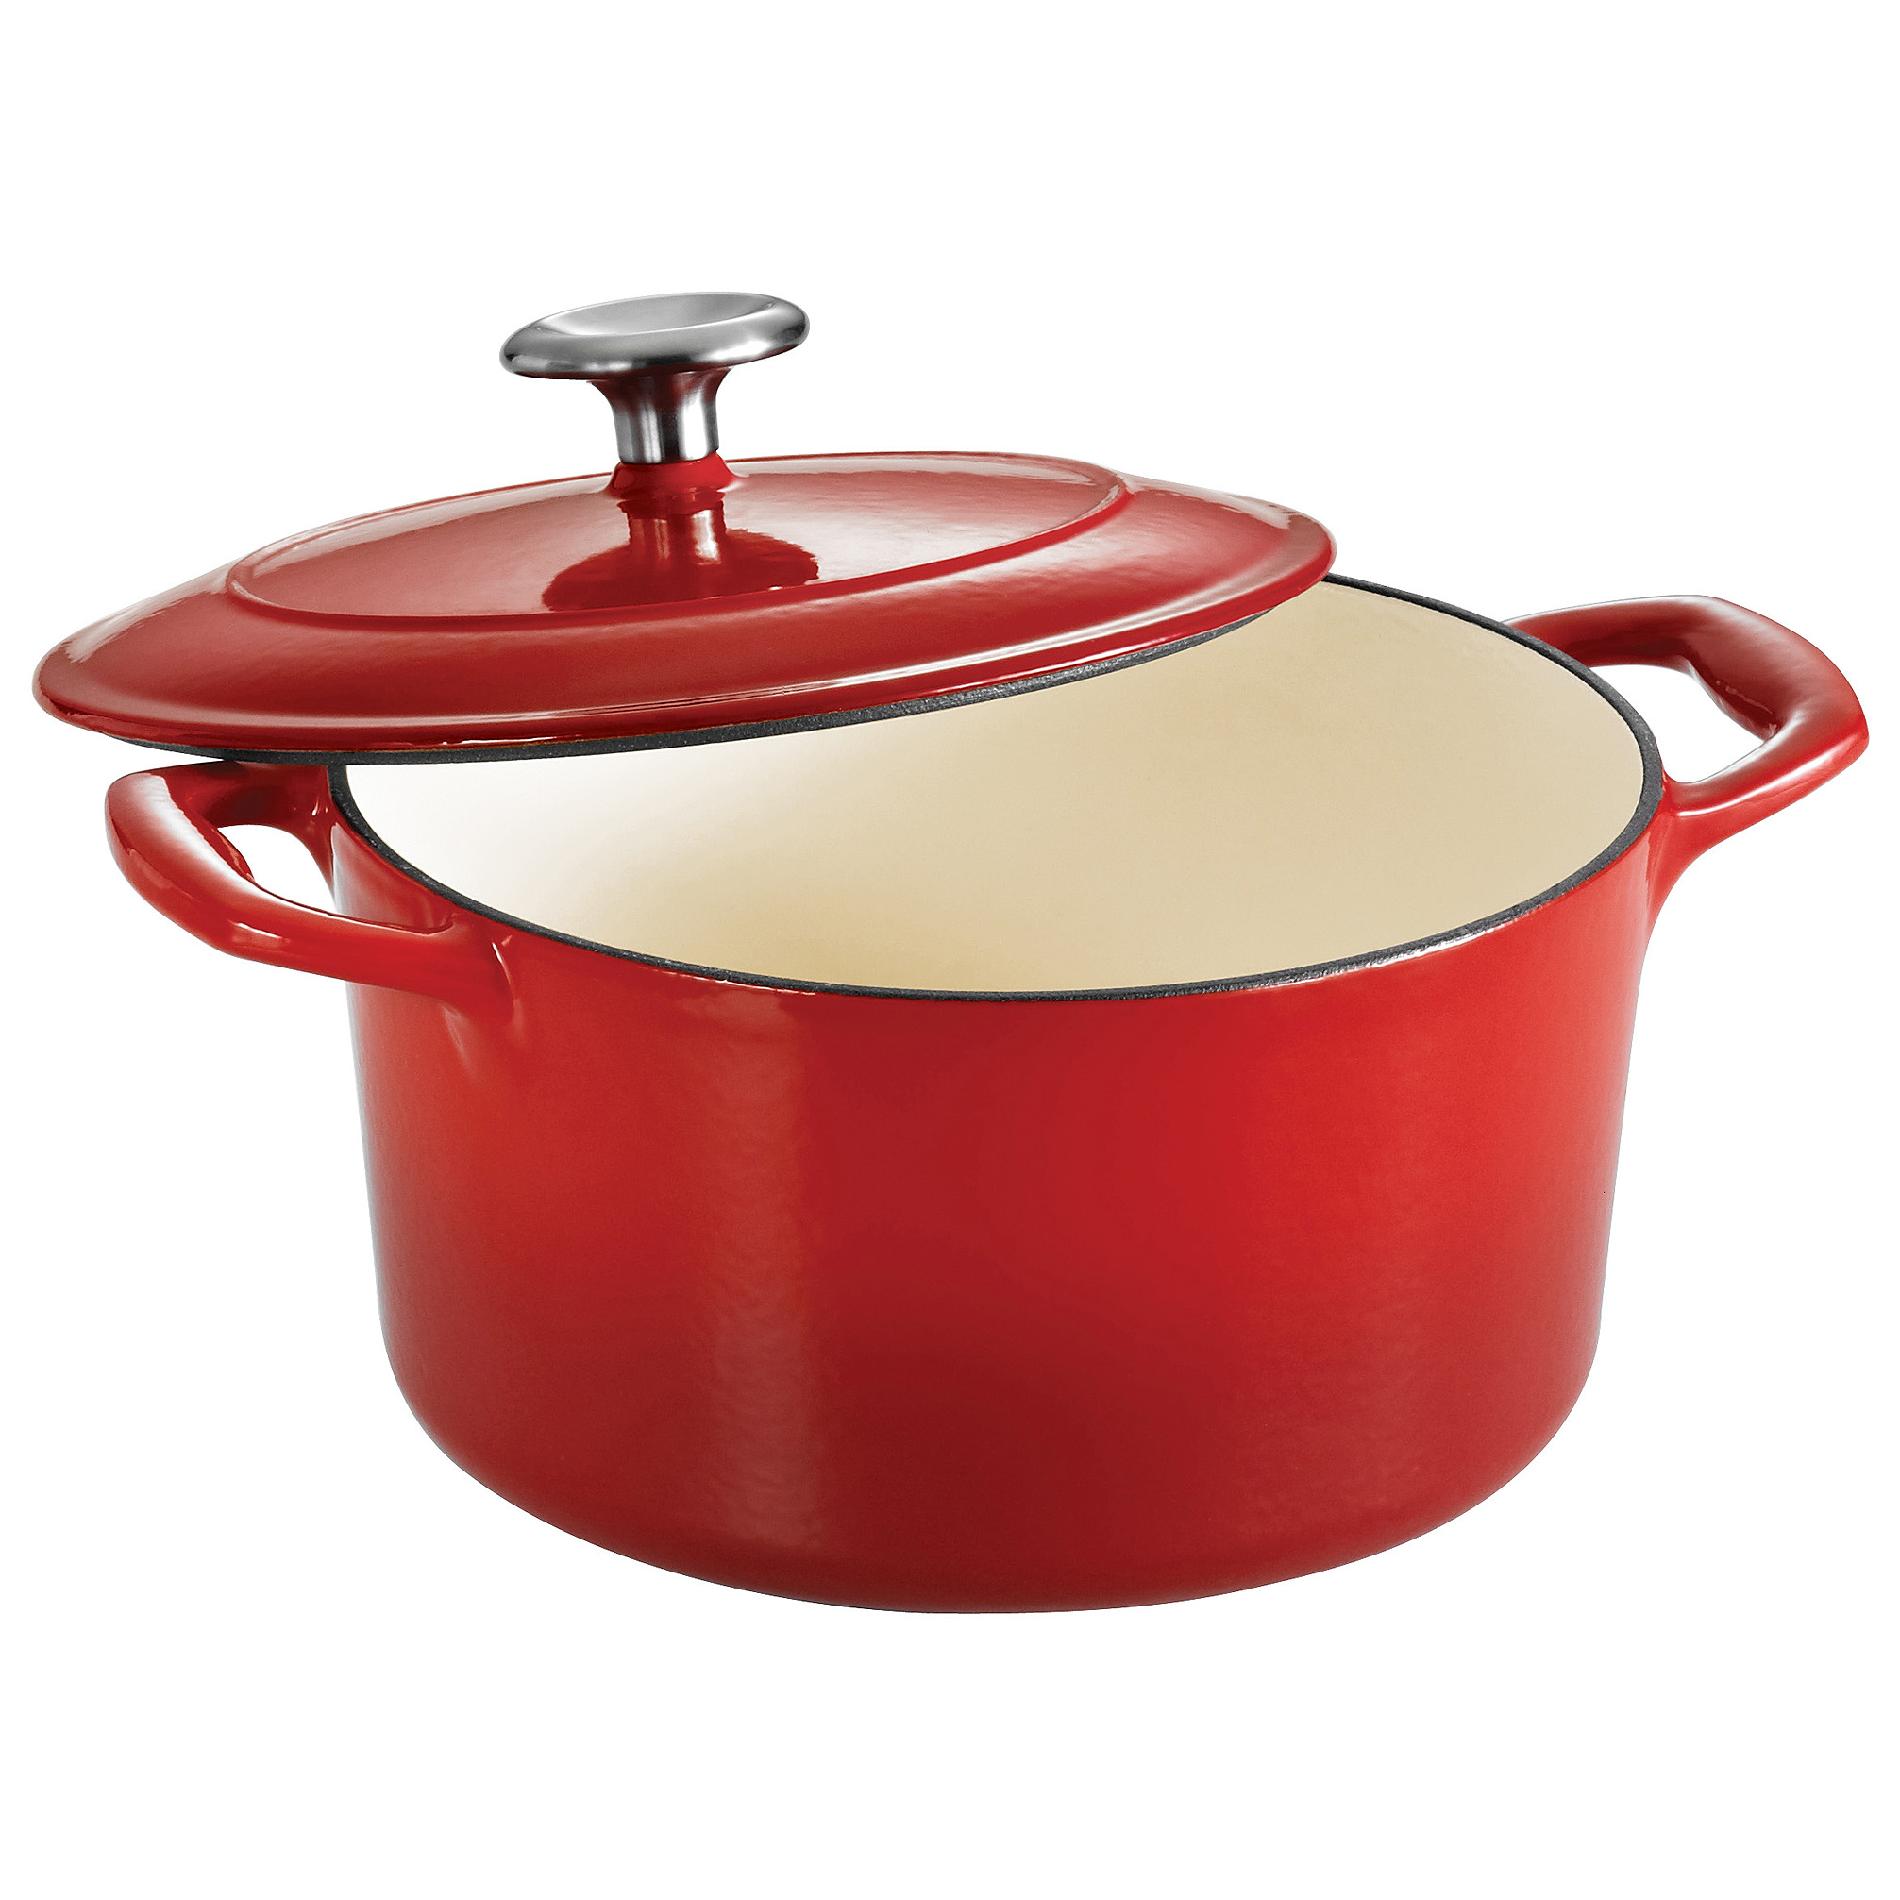 0016017073654 - GOURMET ENAMELED CAST IRON - SERIES 1000 - 3.5 QT COVERED ROUND DUTCH OVEN